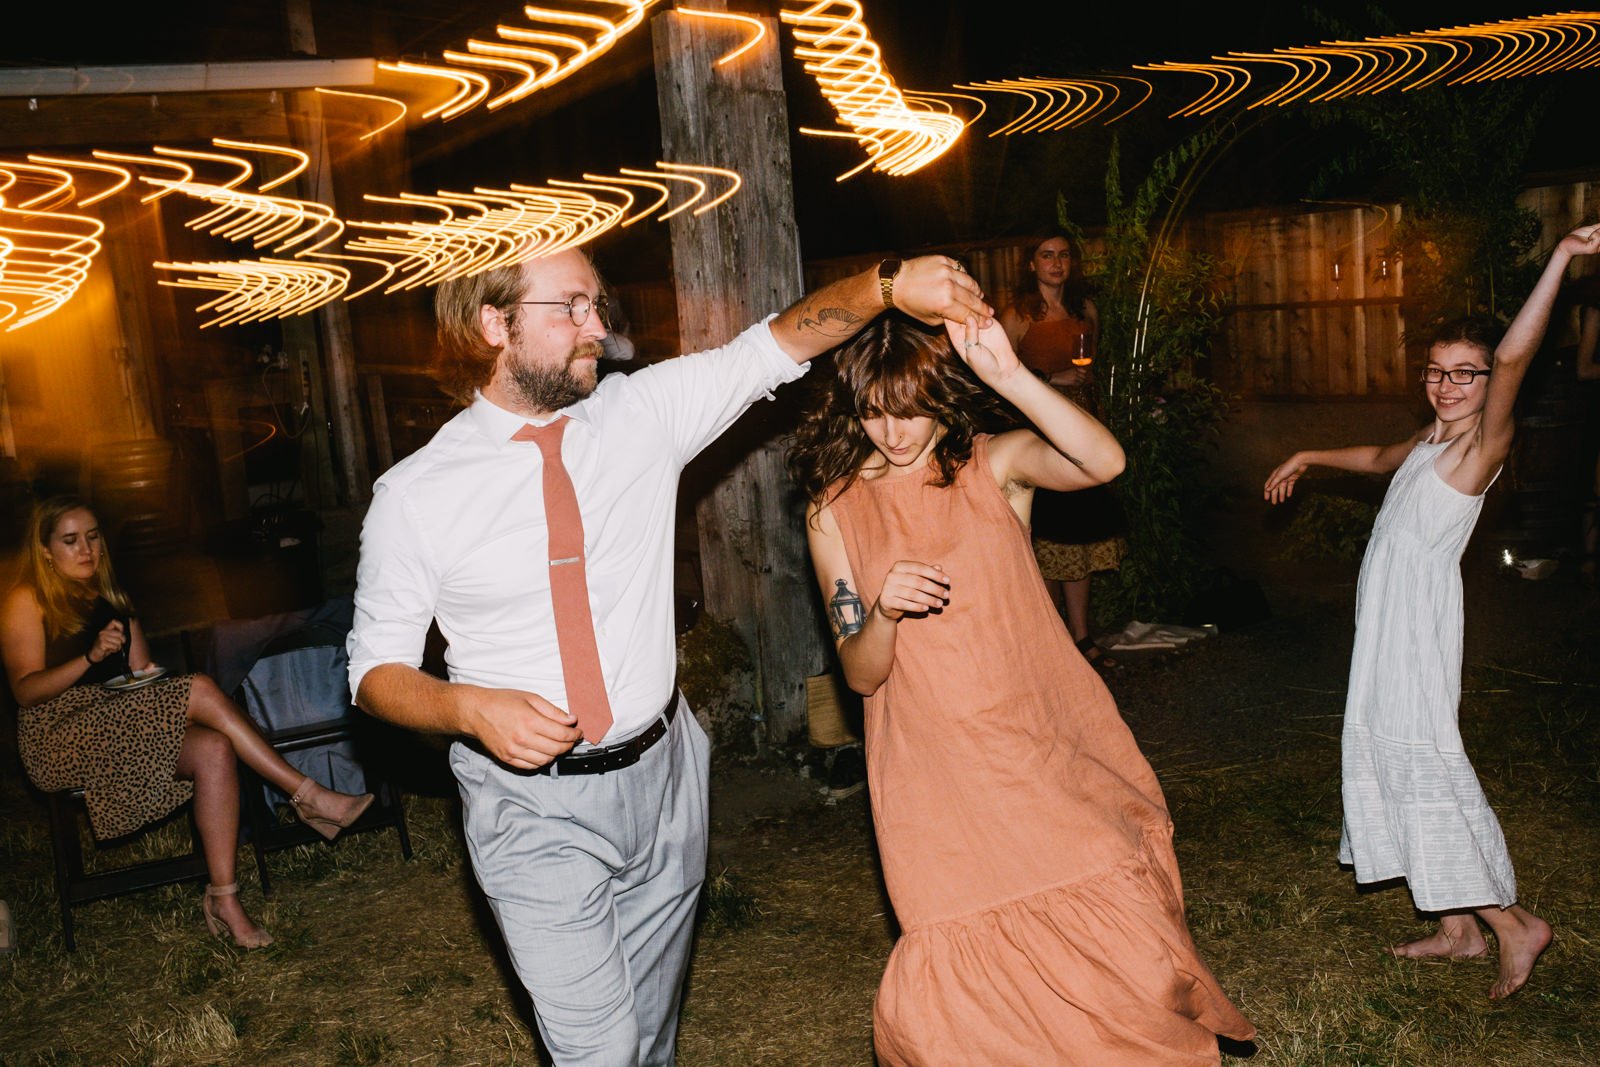  Couple twirls together with peach dress and peach tie 